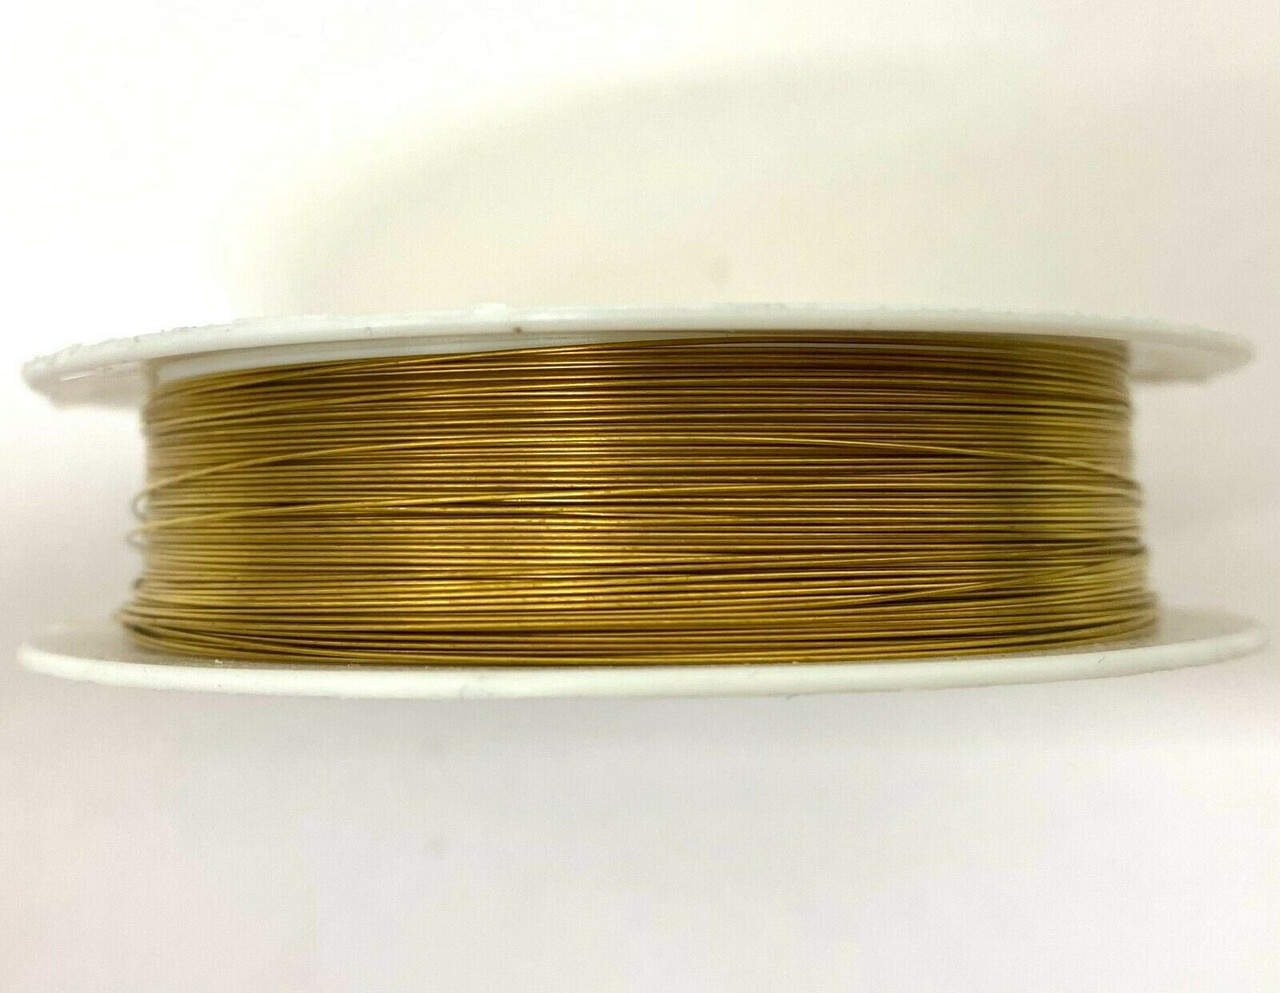 Roll of Copper Wire, 0.4mm thickness, OLD GOLD colour, approx 10m length